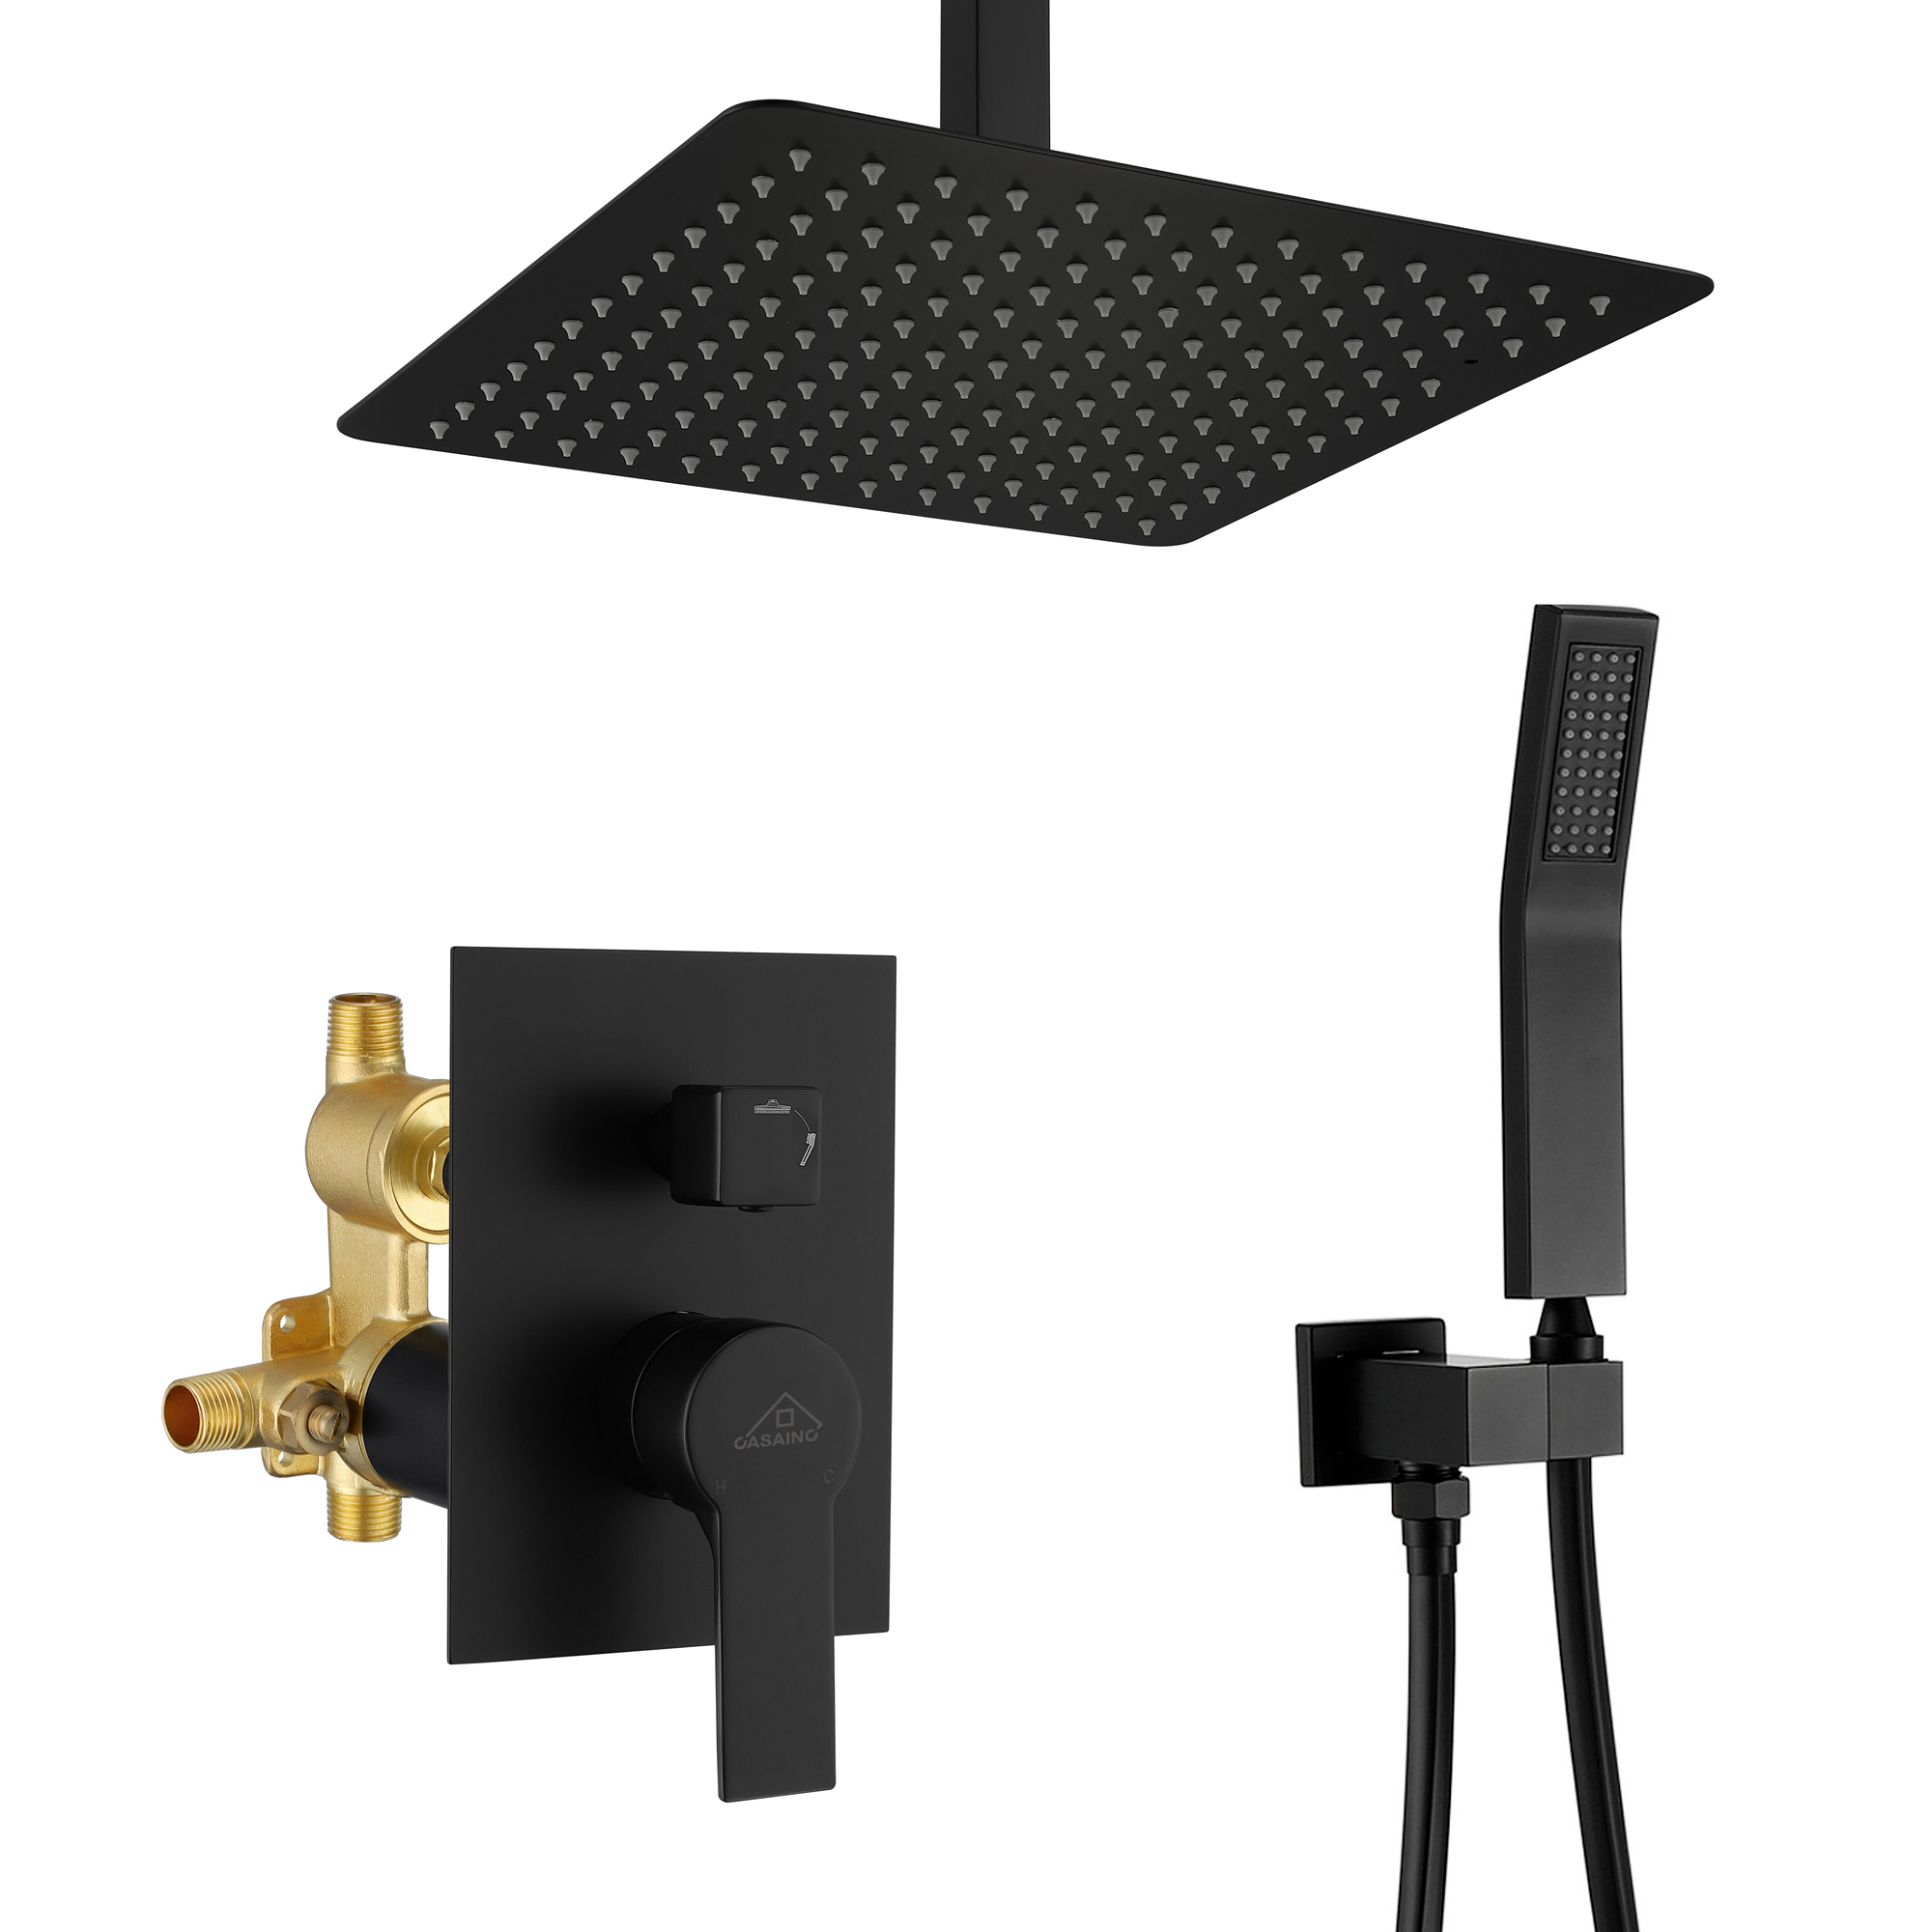 Casainc 2.38 GPM 12-in Ceiling Mounted Shower System with Rough-In Valve Body and Trim (Matte Black)-CASAINC